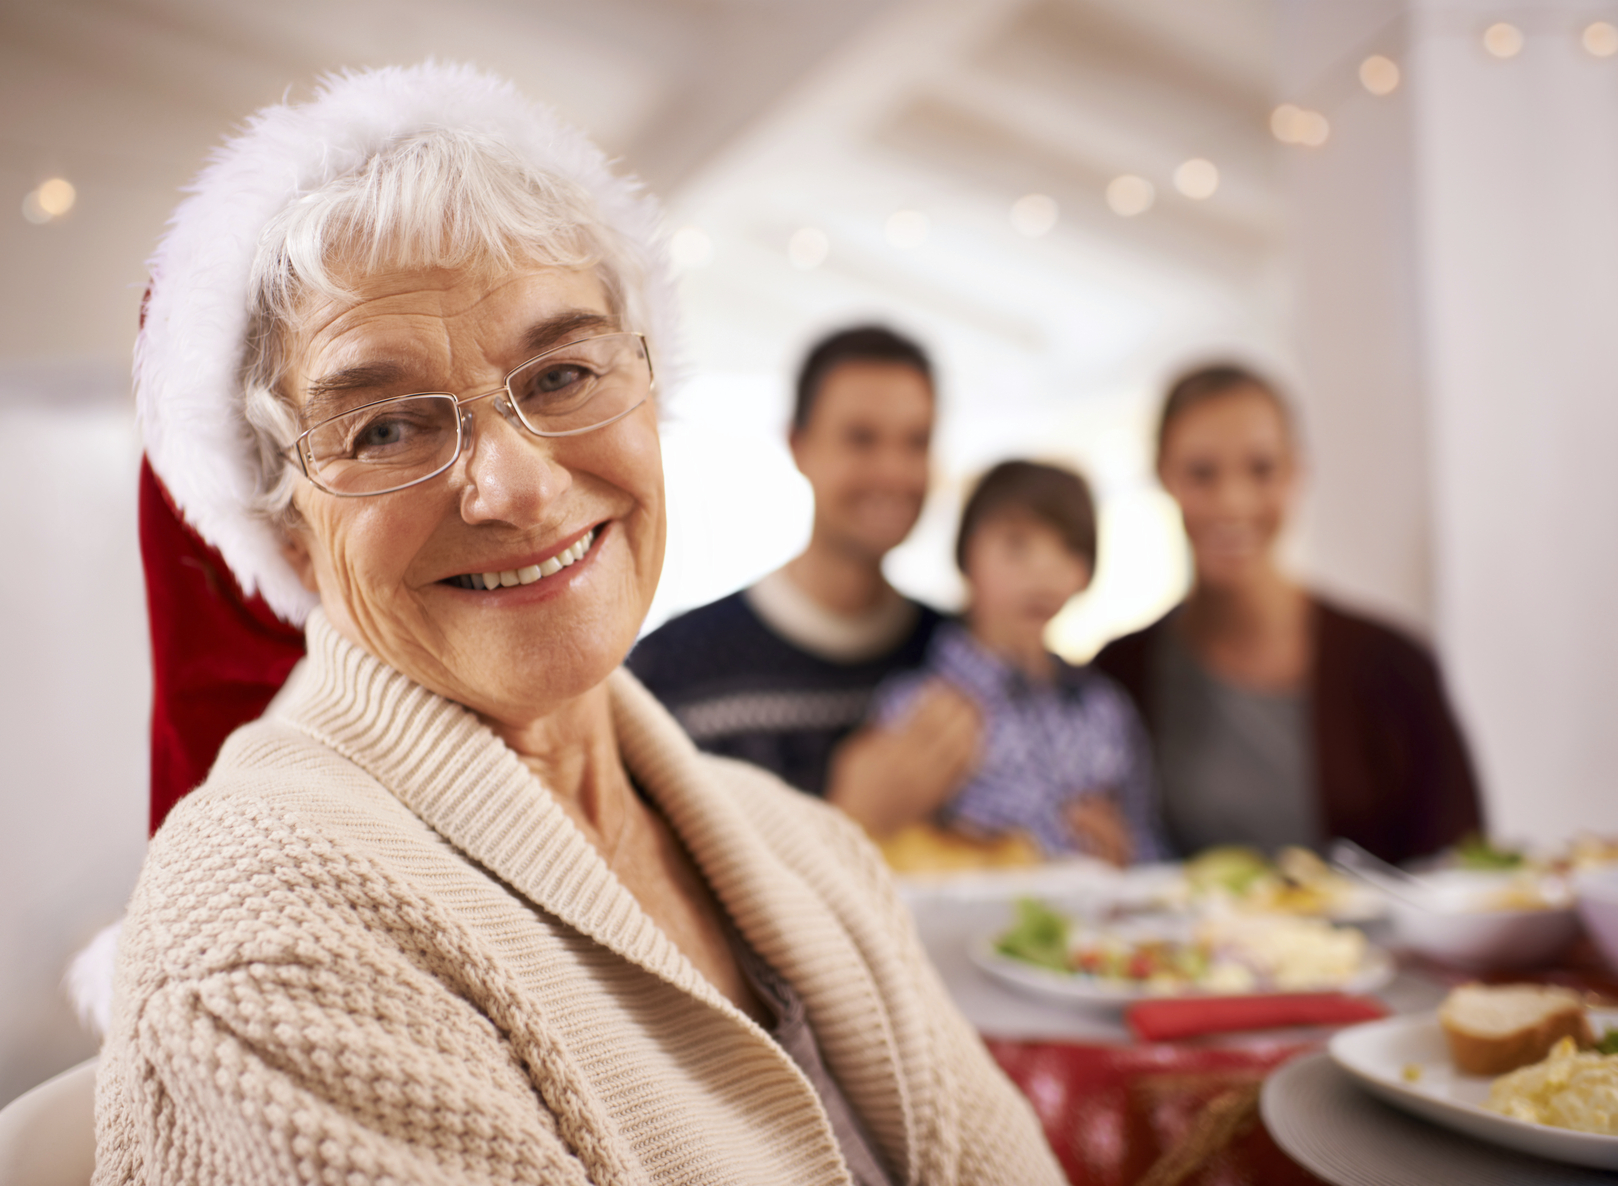 How to Brighten the Holidays for Seniors